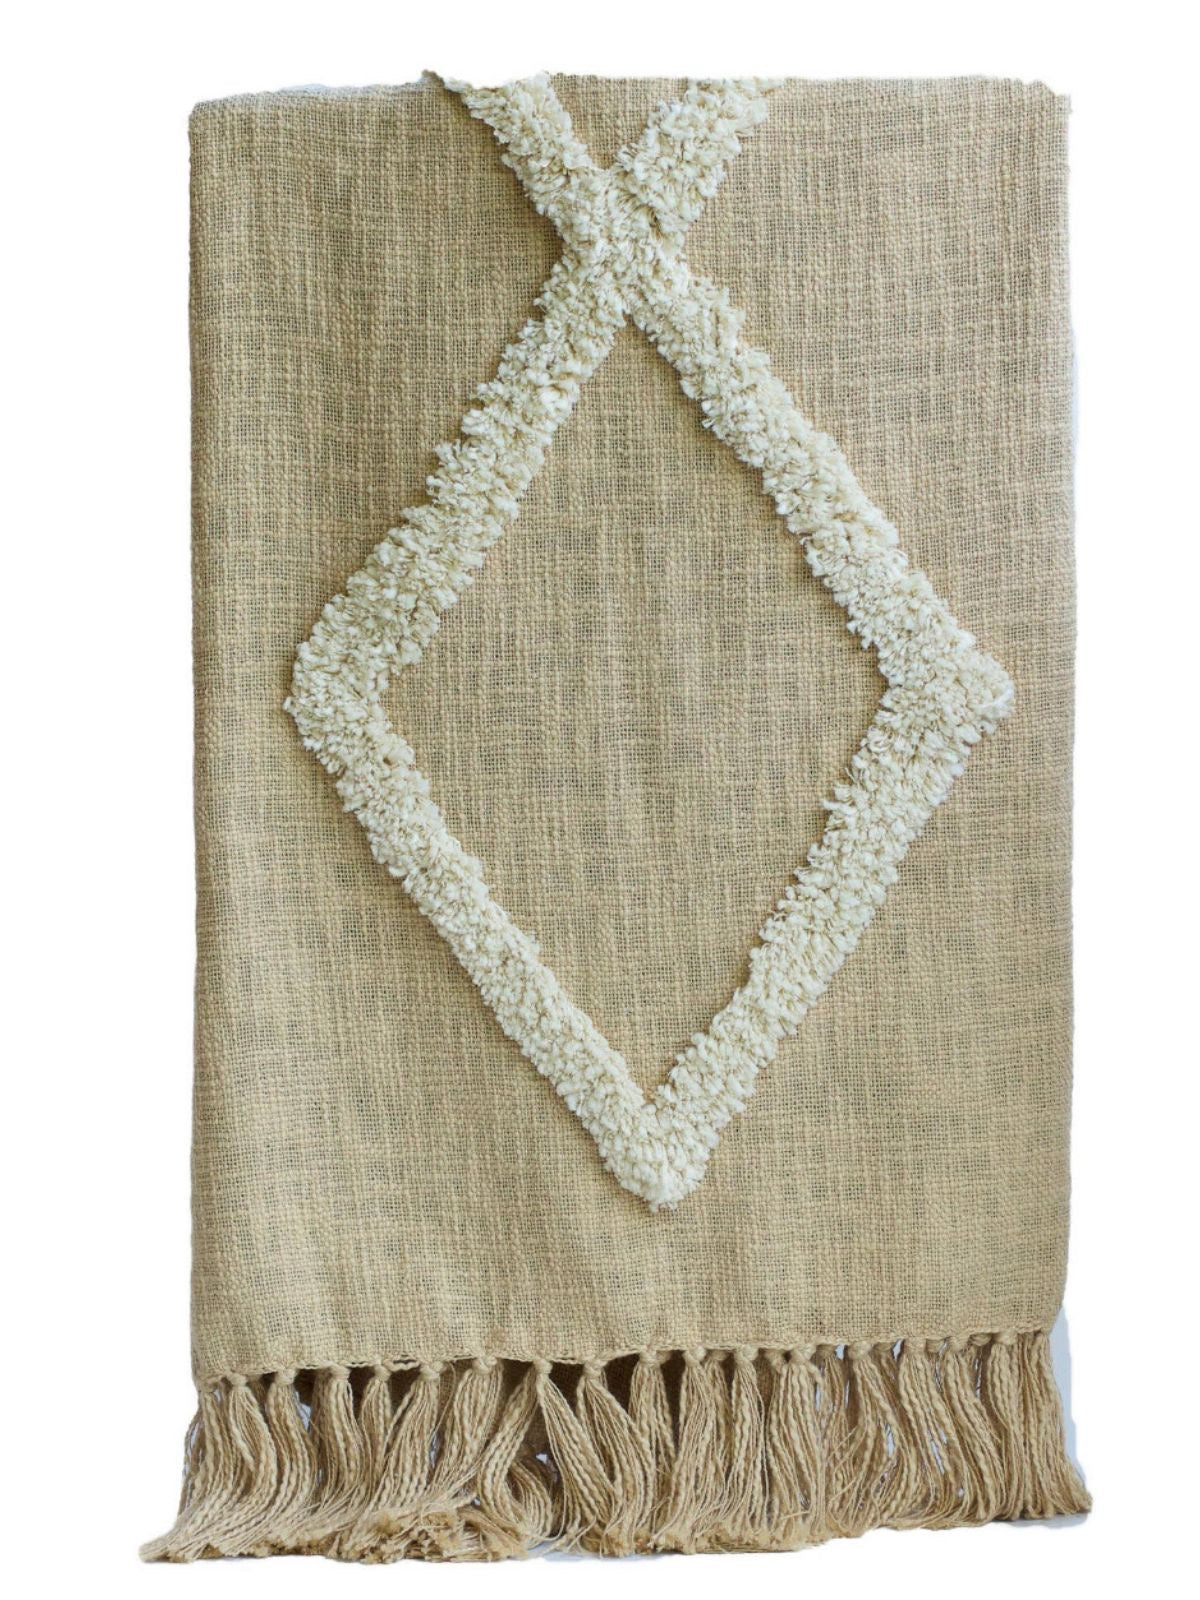 Champagne Gold Modern Tribal Tufted 100% Cotton Decorative Throw Sold by KYA Home Decor, 50W x 60L. 